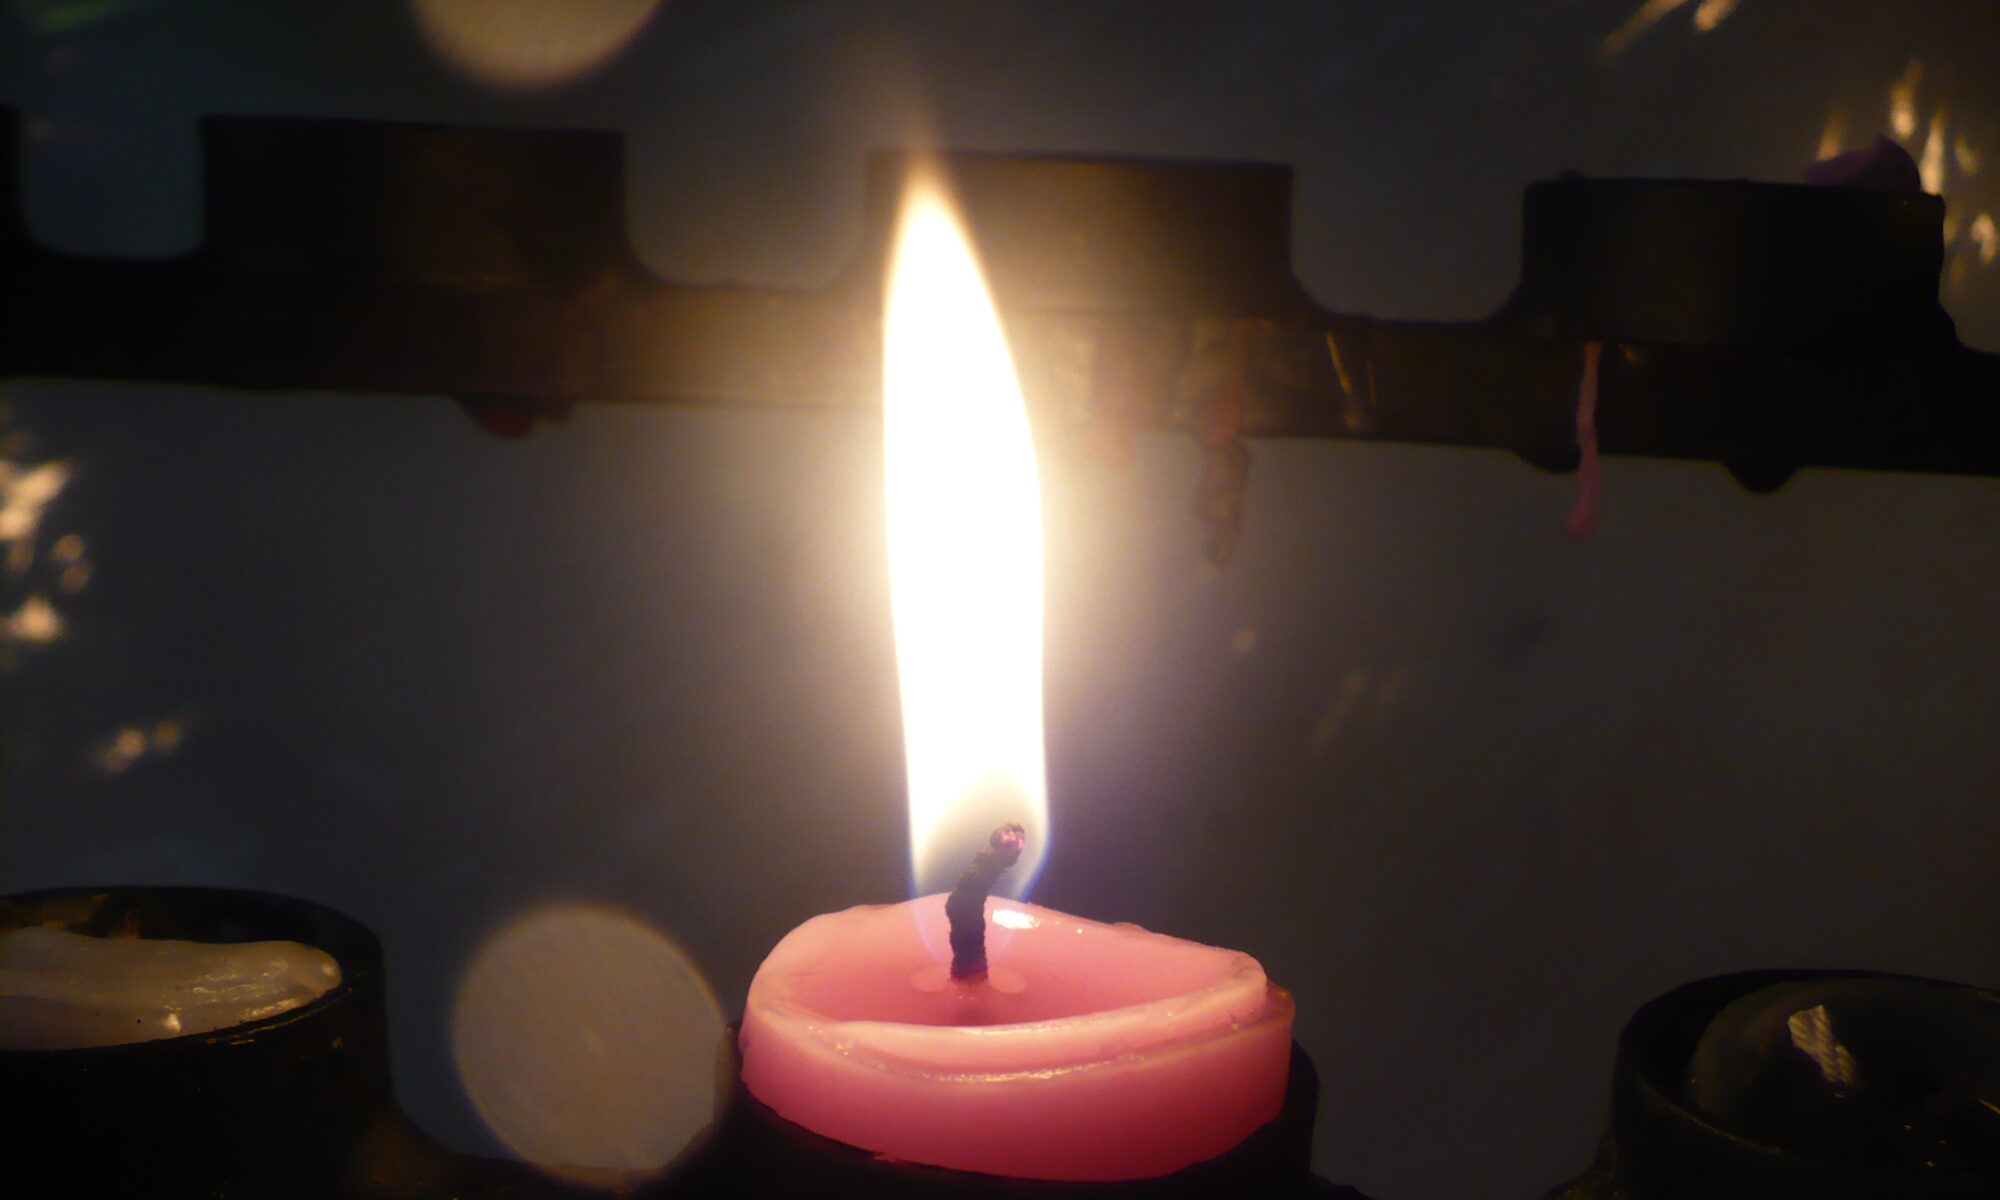 A candle flame